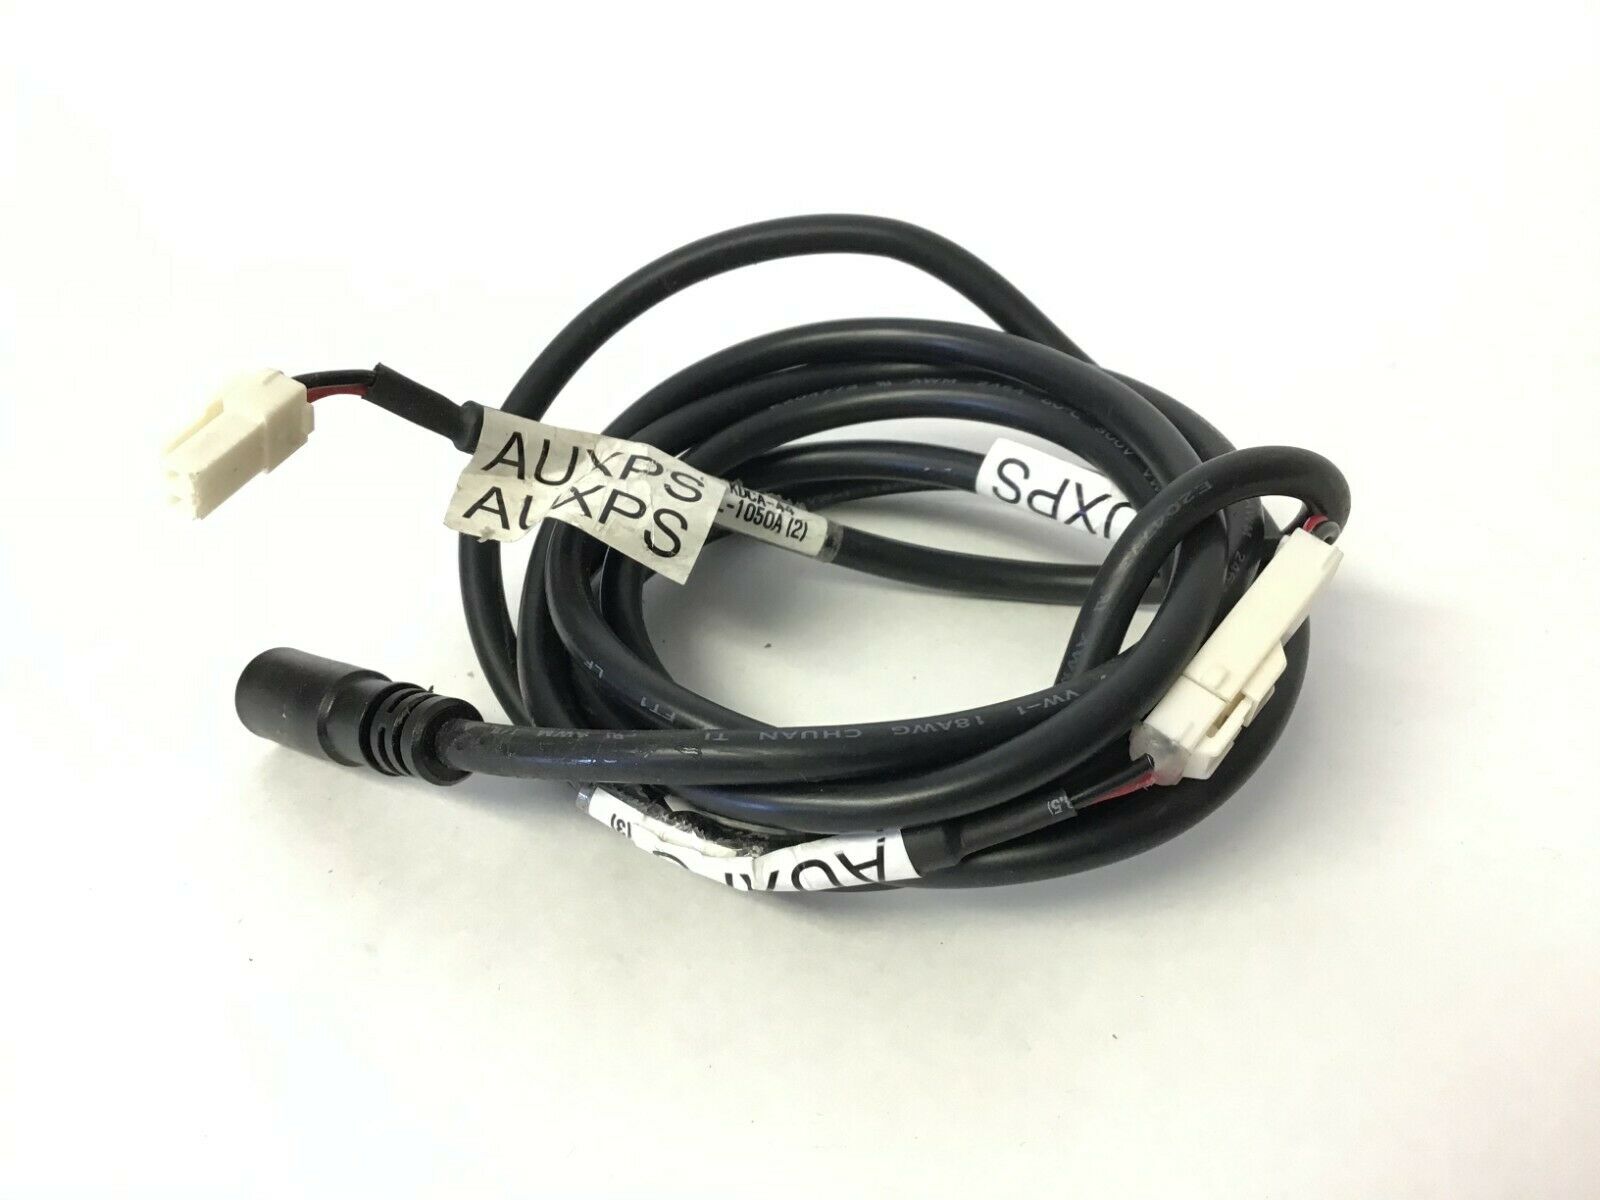 True Fitness LC 1100 LC1100 Treadmill AX Cable Wire Harness XL-1050Ac (Used)